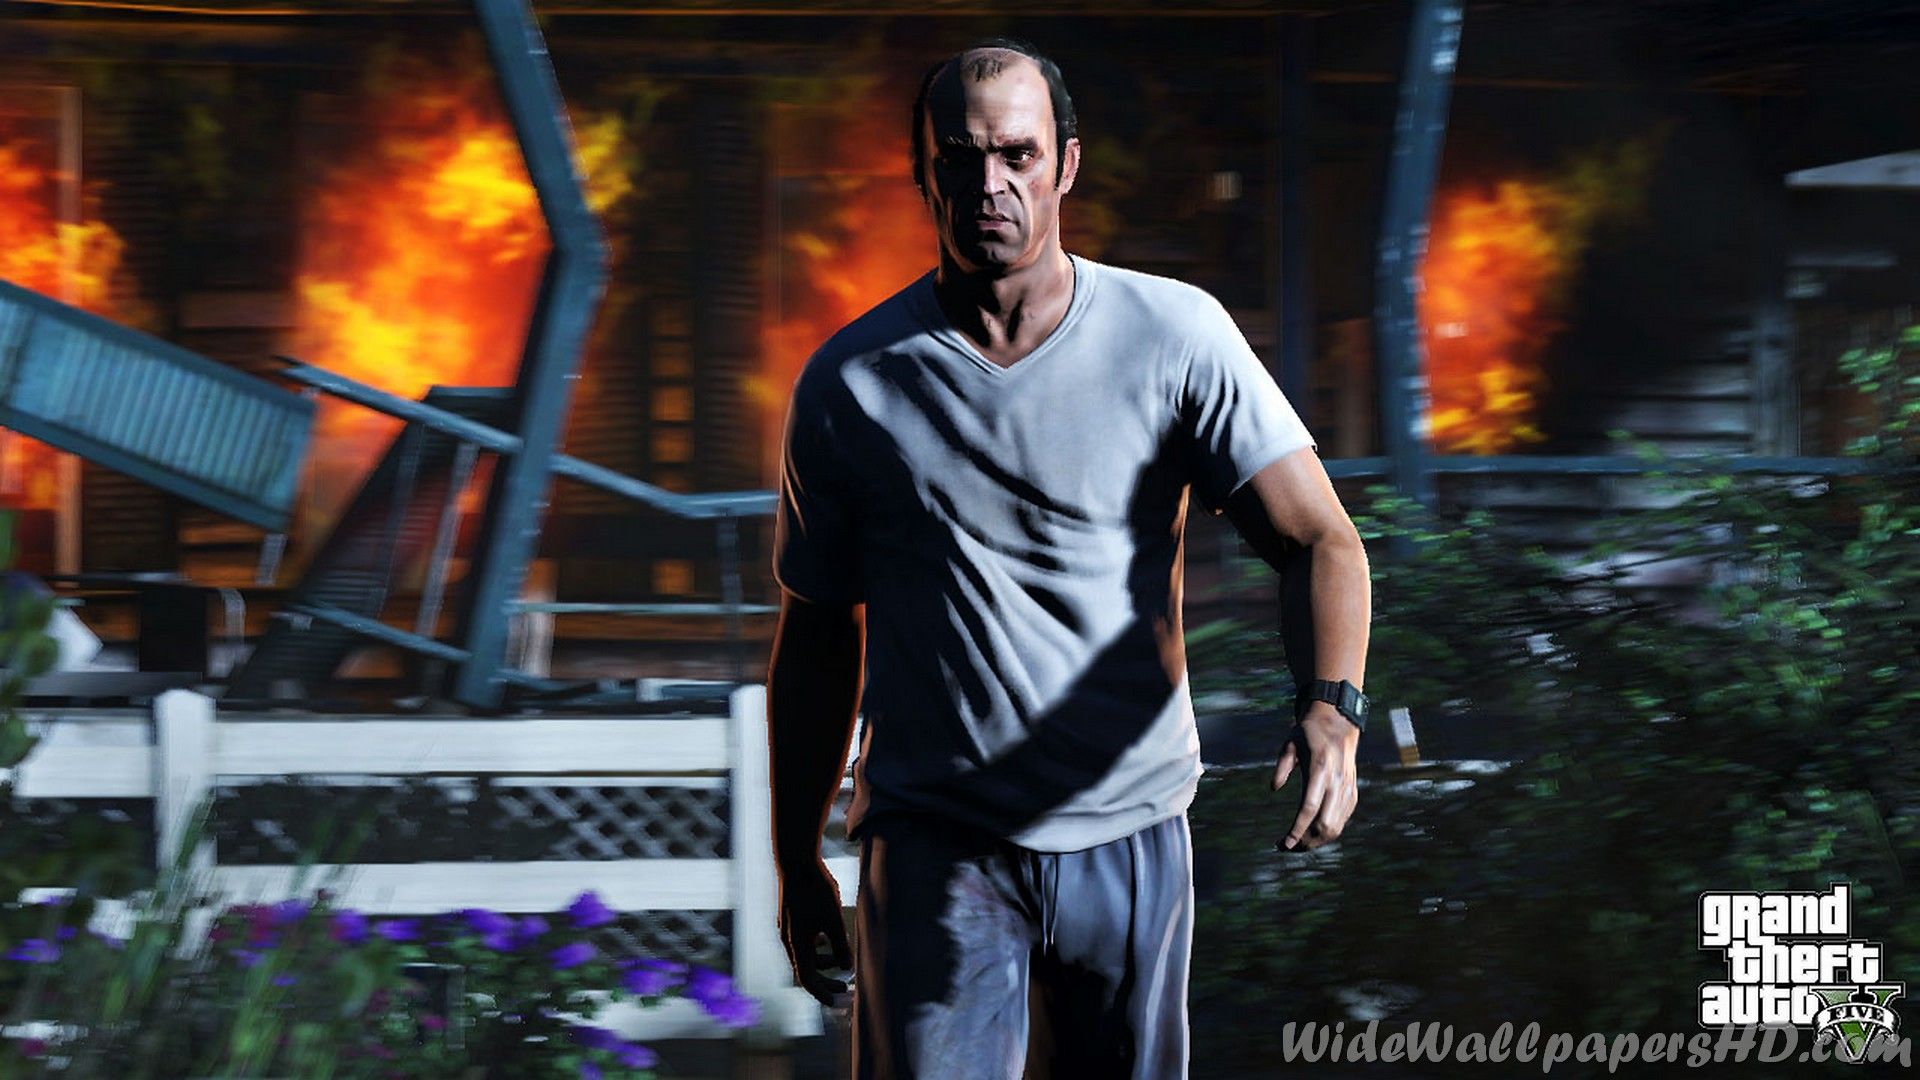 gta 5 wallpaper for pc,games,fictional character,movie